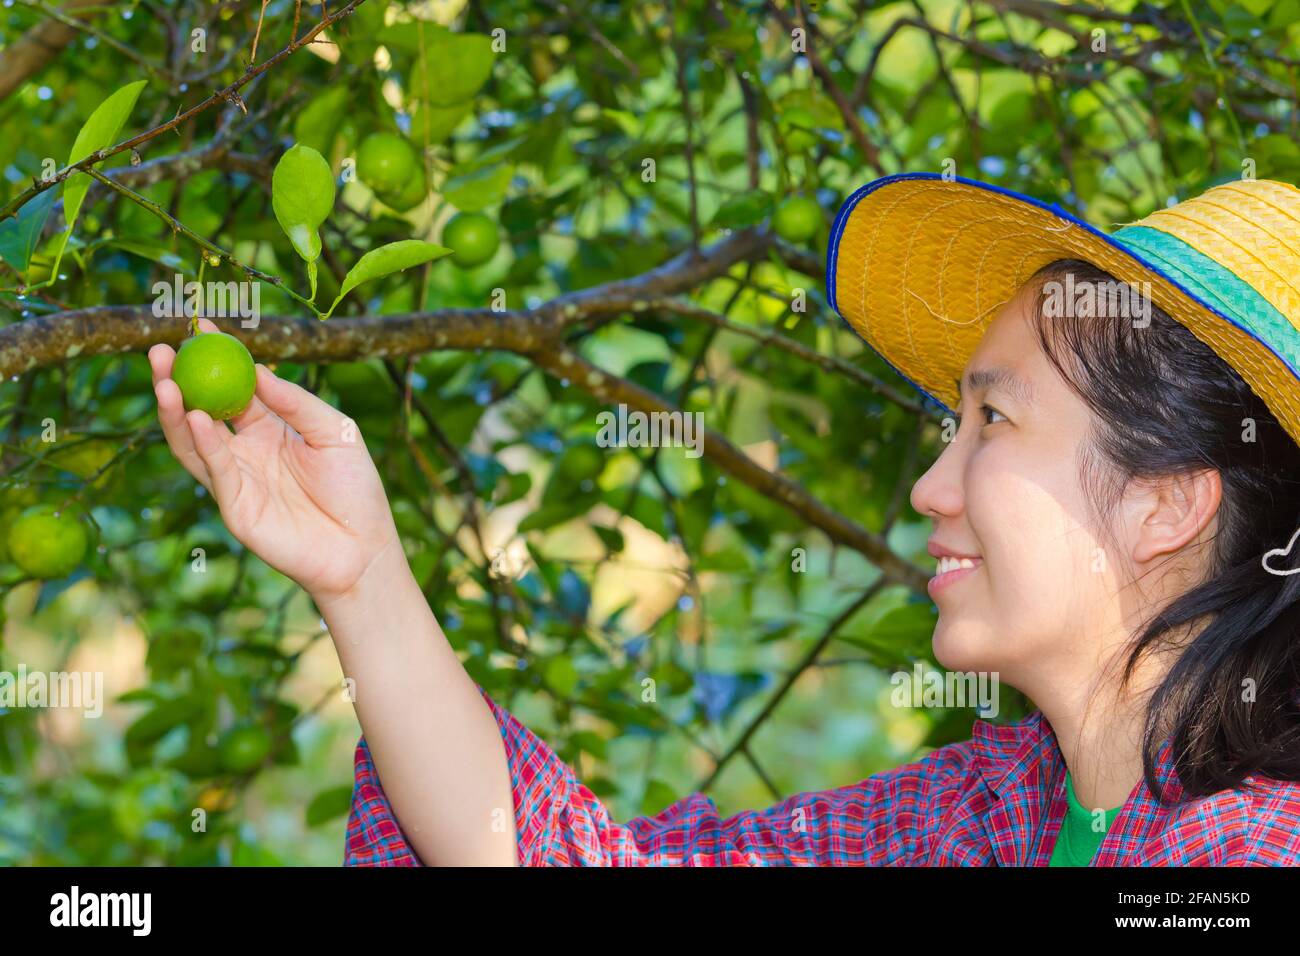 Asian woman (thai) agriculturist hand holding fresh lemon from tree branch, in the vegetable garden Stock Photo